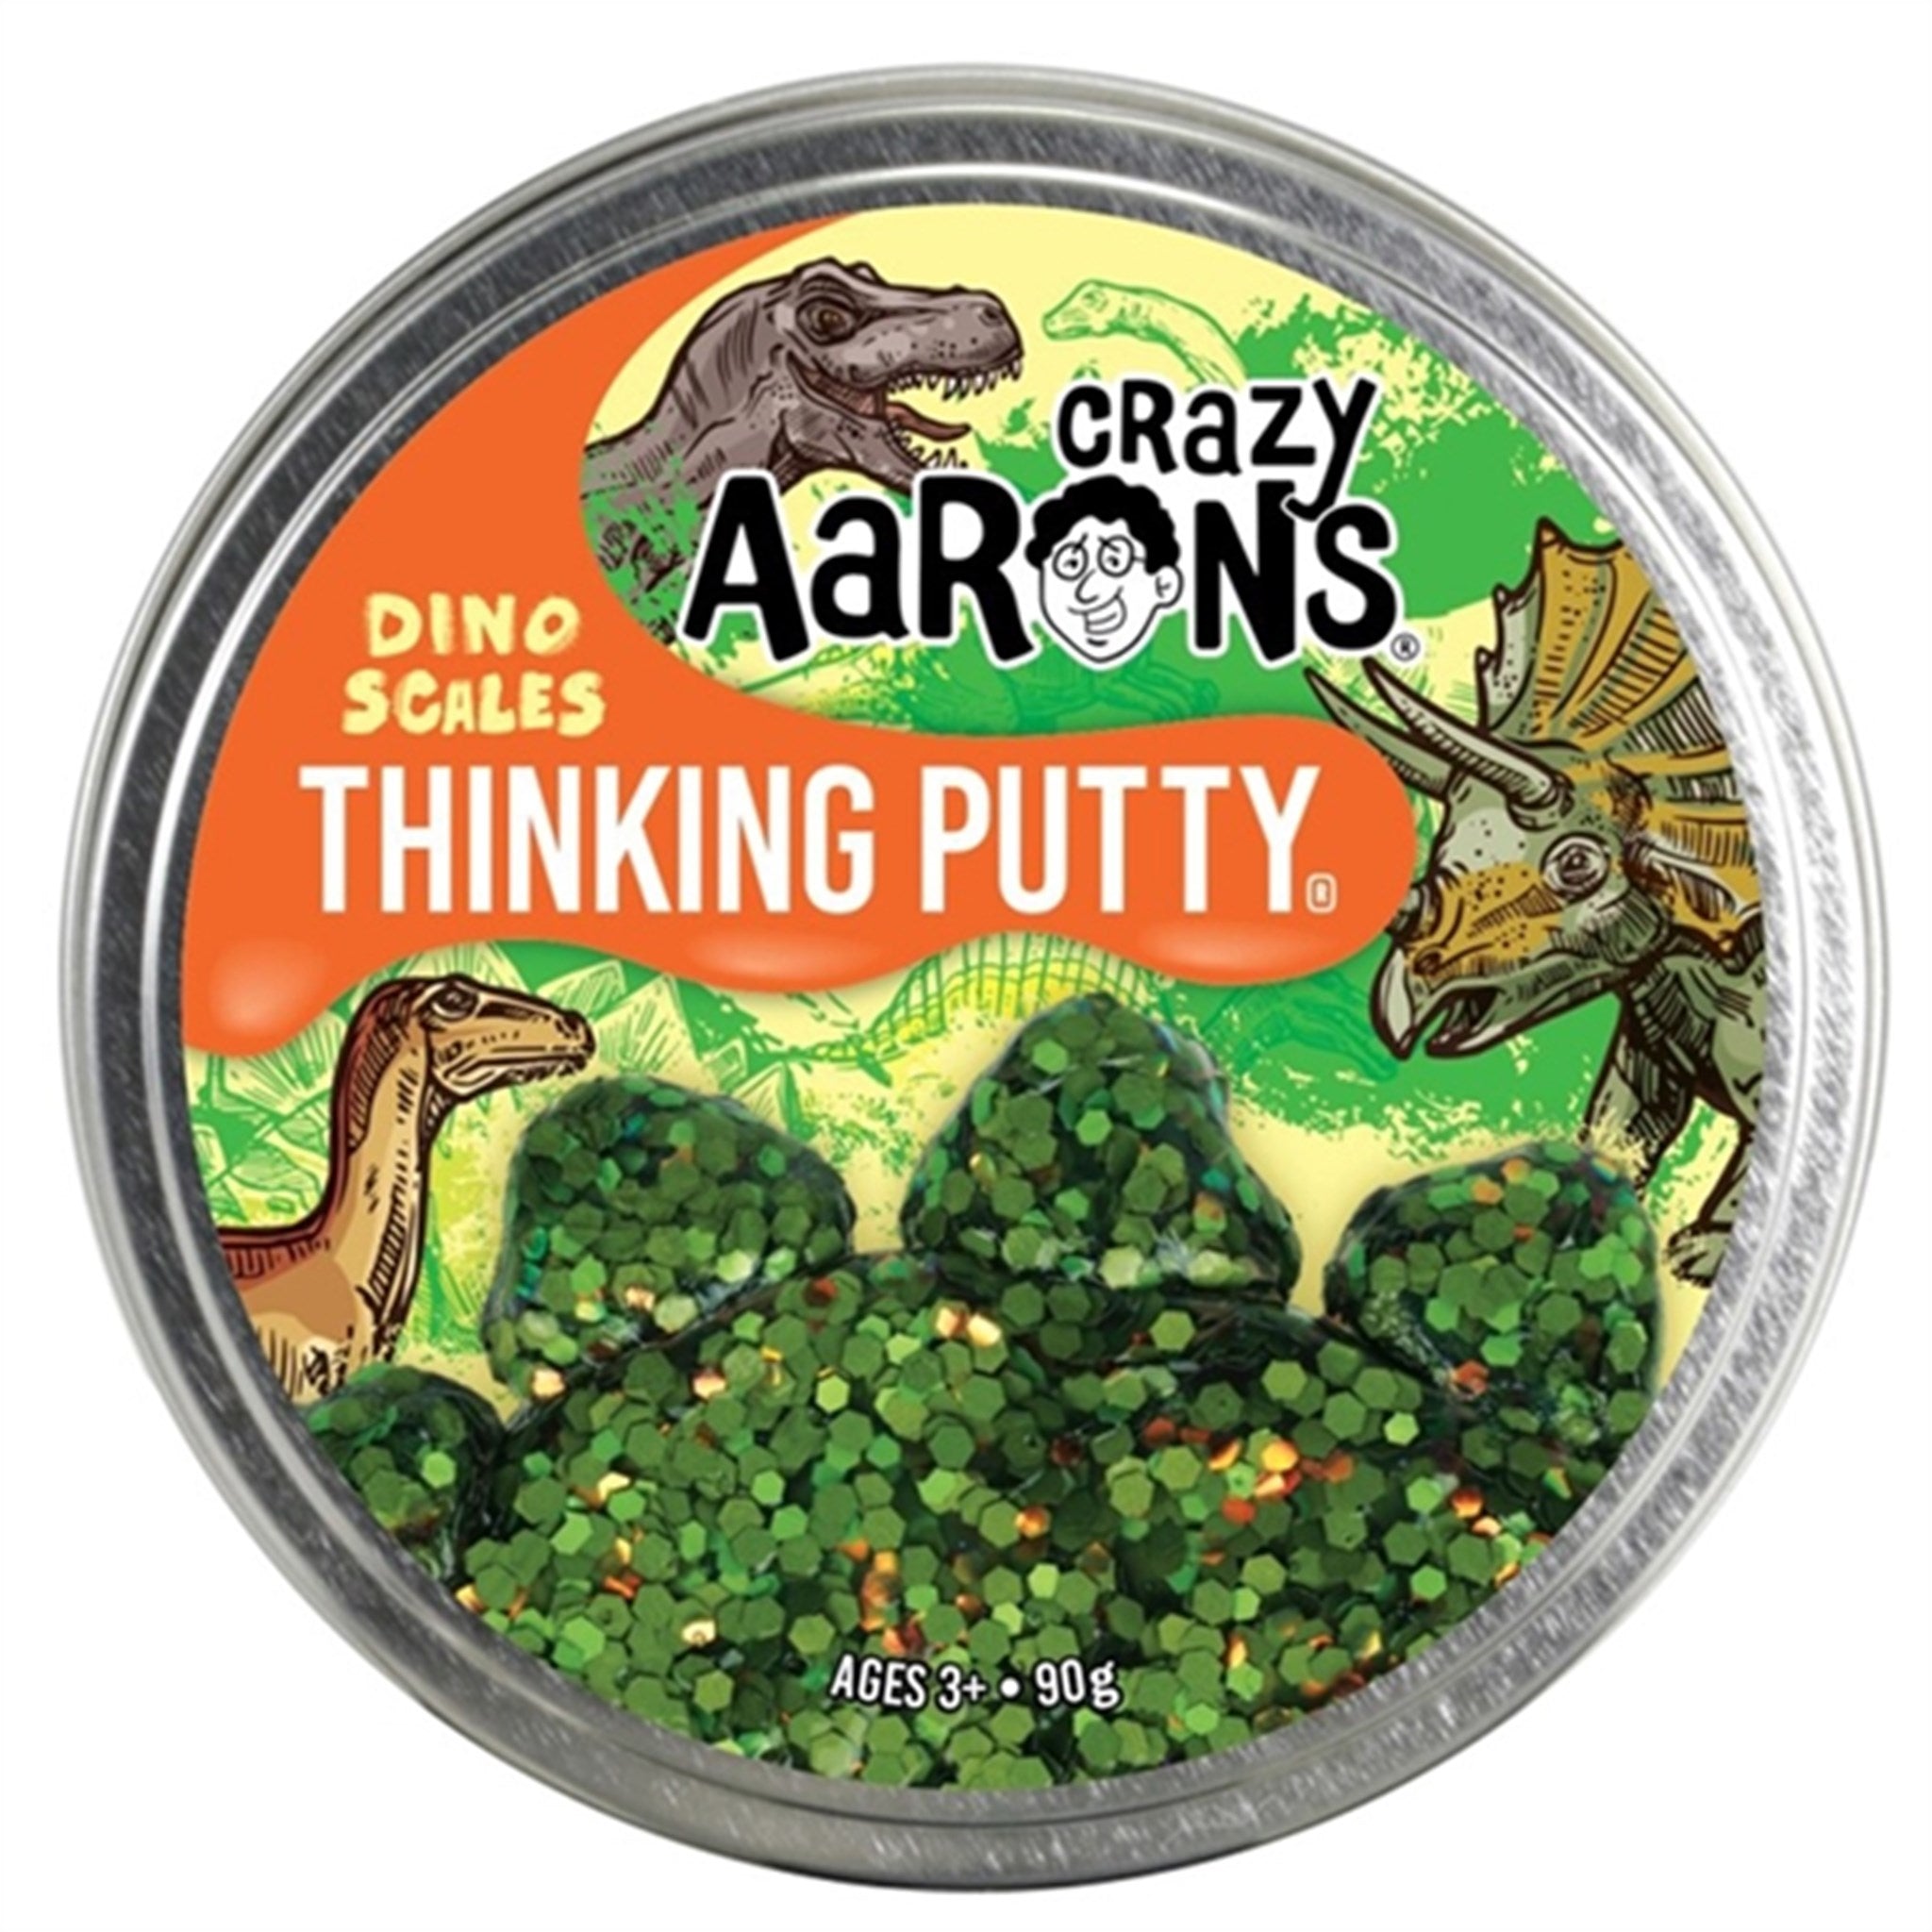 Crazy Aaron's® Thinking Putty Trendsetters - Dino Scales